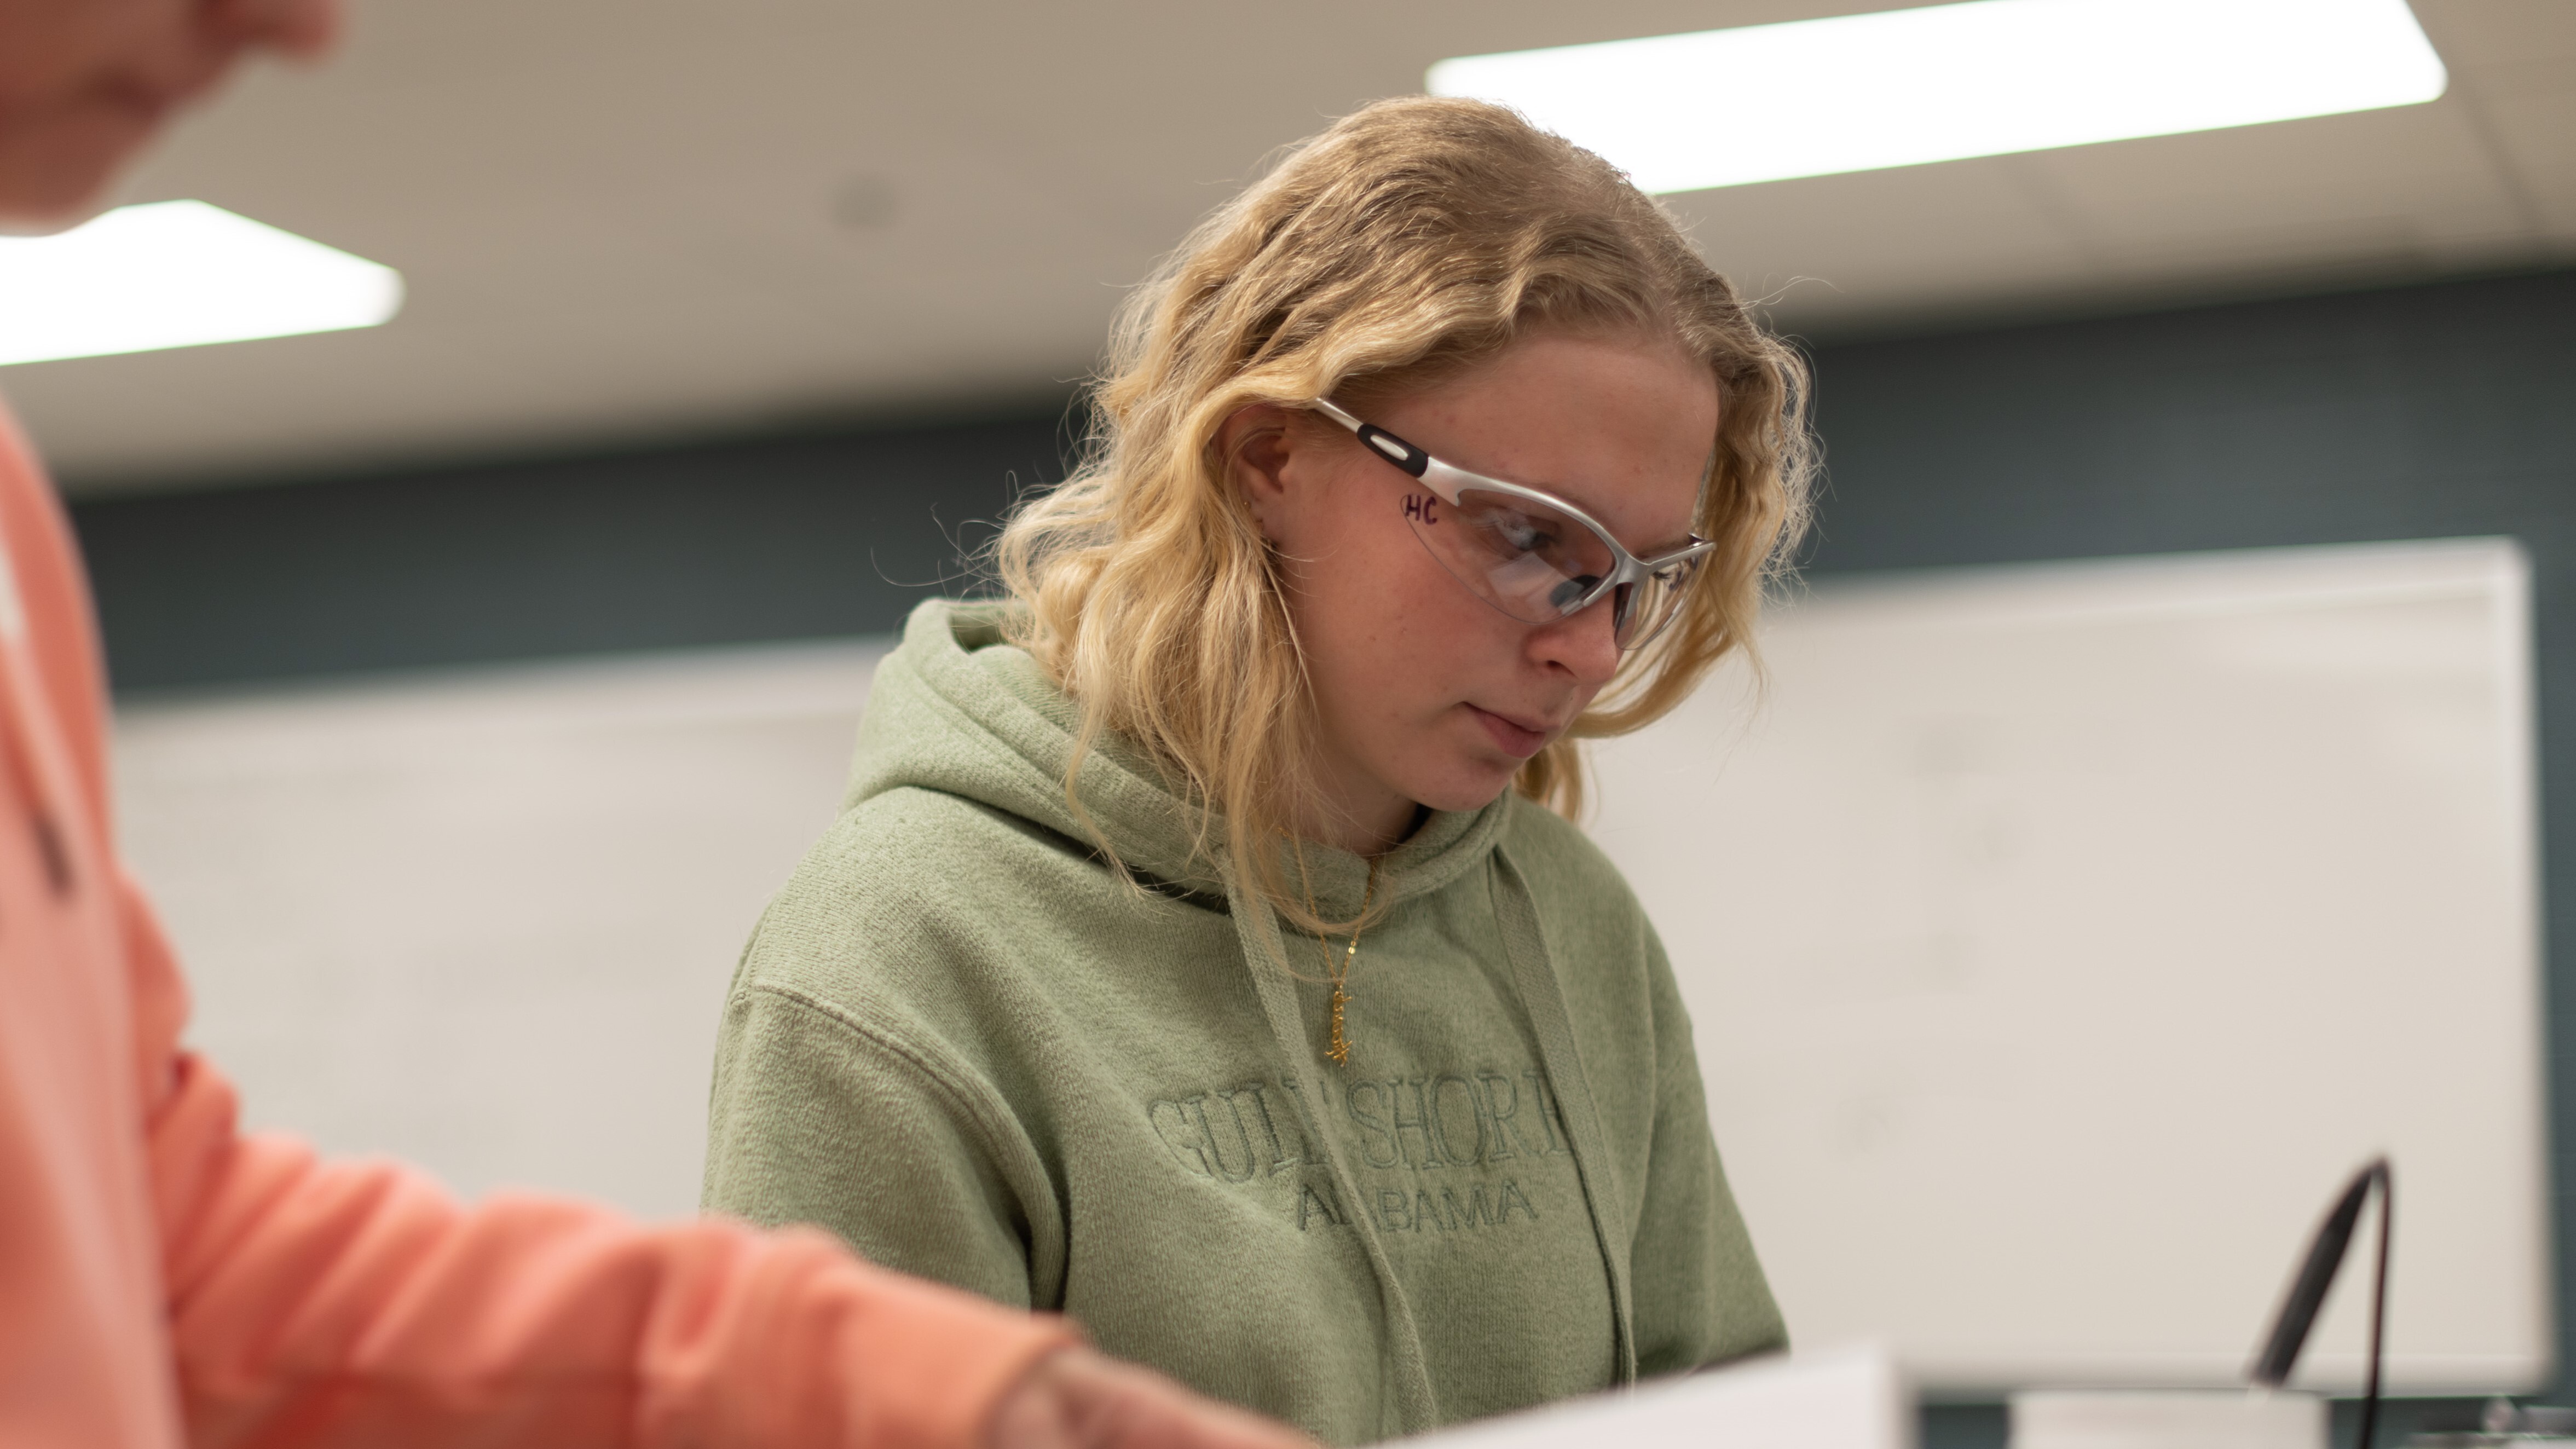 Female student with safety goggles on